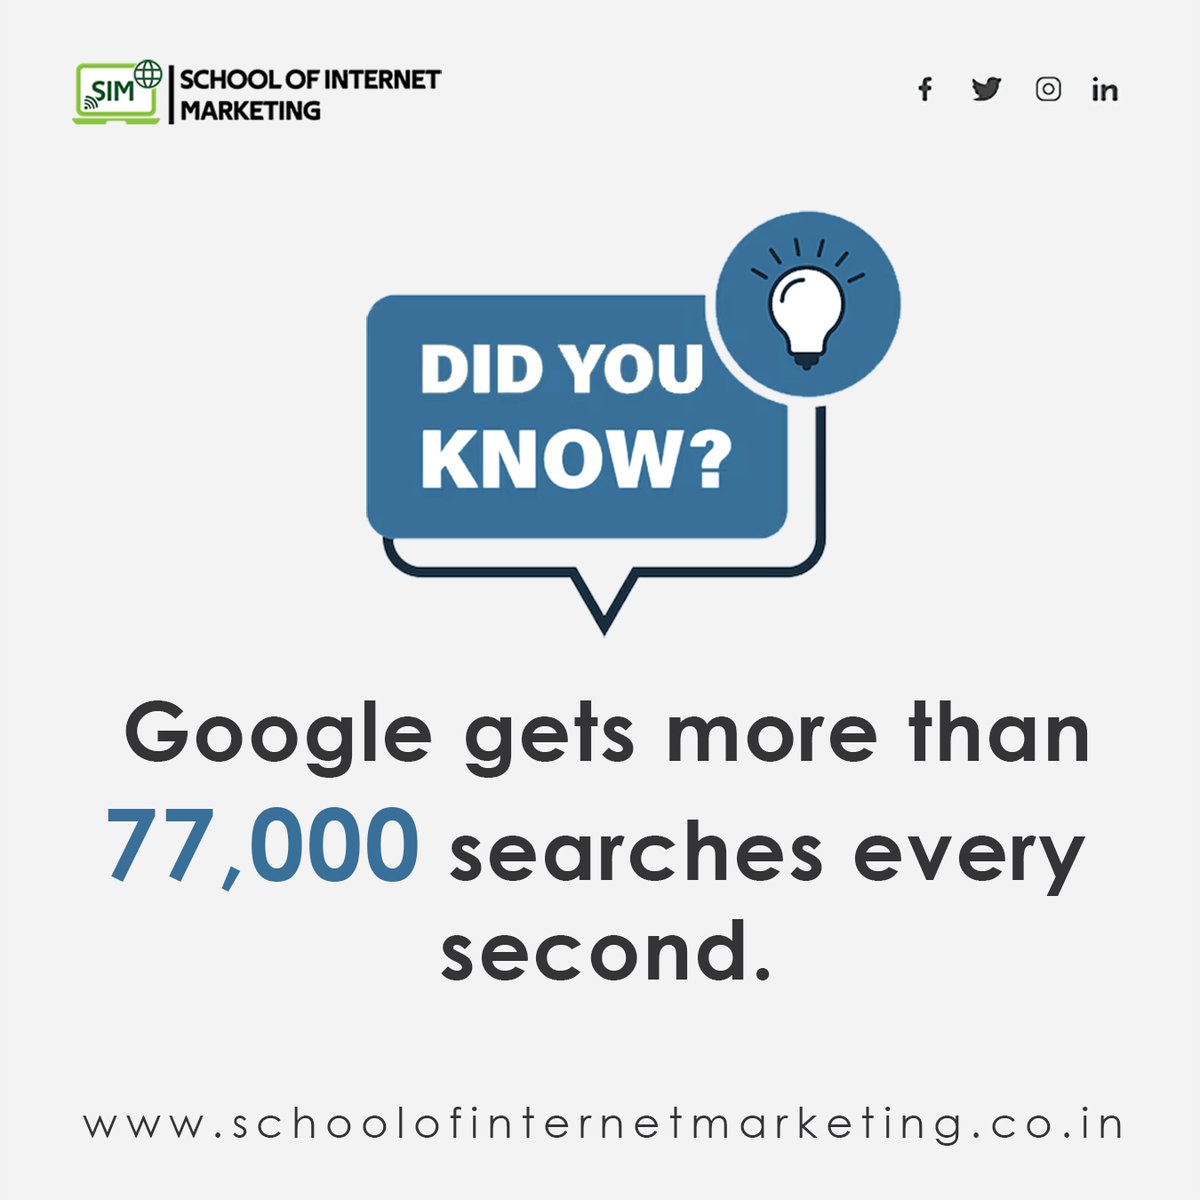 🤔Did You Know?
✨Google Receives Over 77,000 Searches Per Second🧐
👉And 67% Of Clicks Go To The First 5 Results Displayed In Search Engines.

#DidYouKnow #didyouknow #DidYouKnowThis #didyouknowthat #didyouknowfacts #didyouknowdaily #didyouknowfacts #digitalmarketing #google